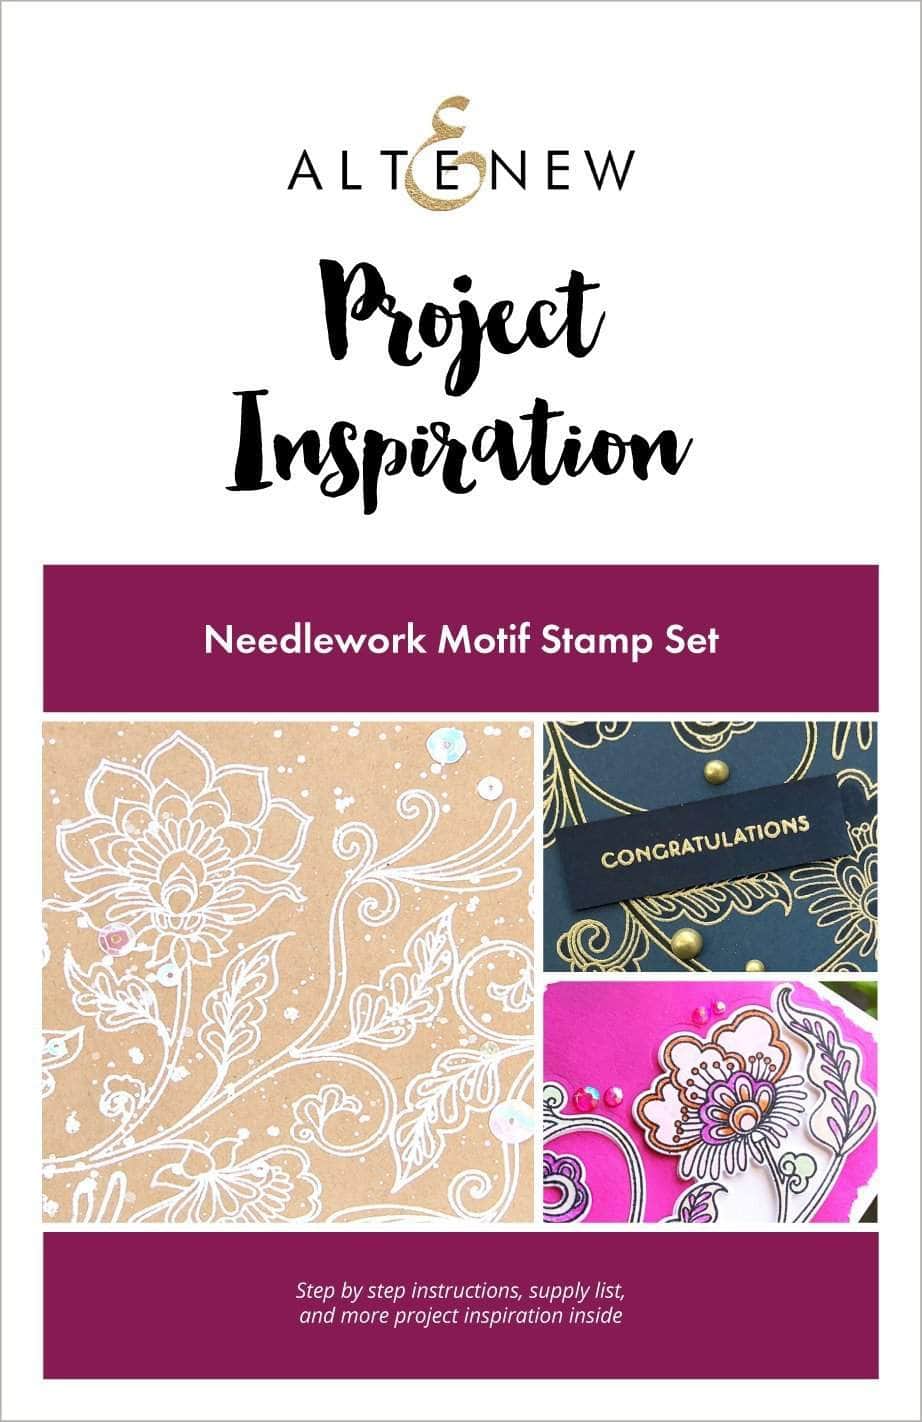 Printed Media Needlework Motif Project Inspiration Guide